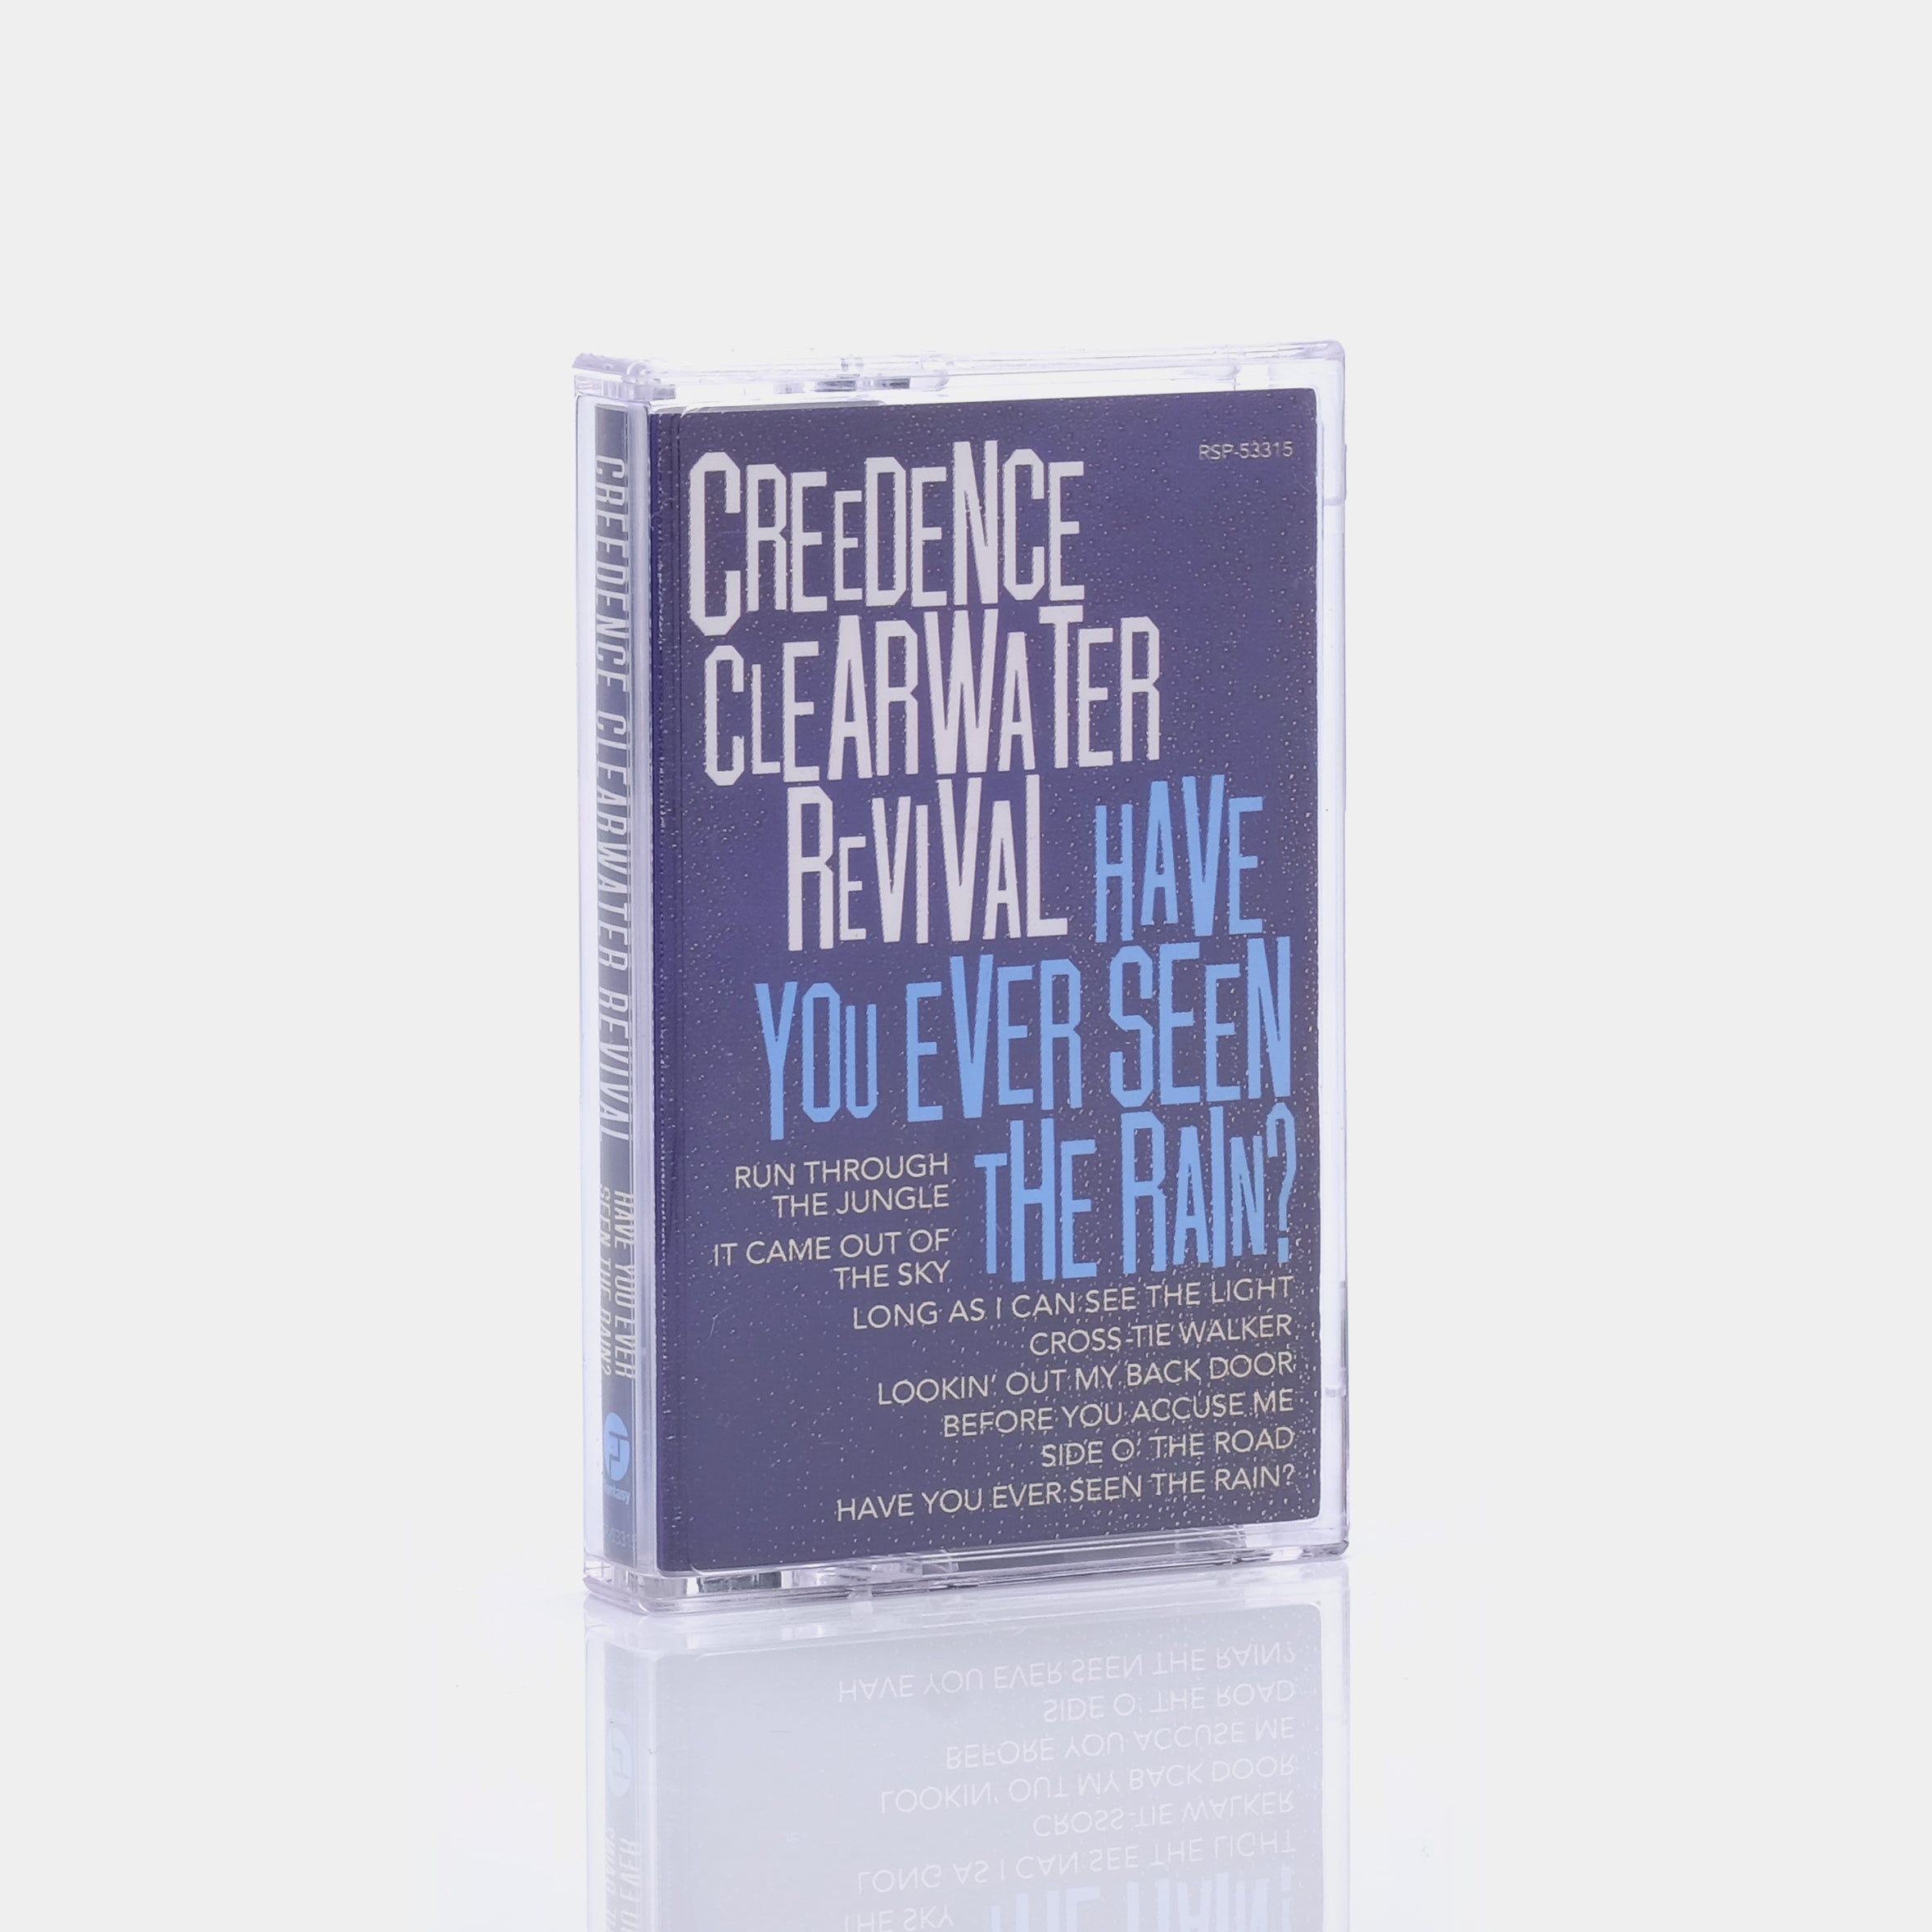 Creedence Clearwater Revival - Have You Ever Seen The Rain? Cassette Tape